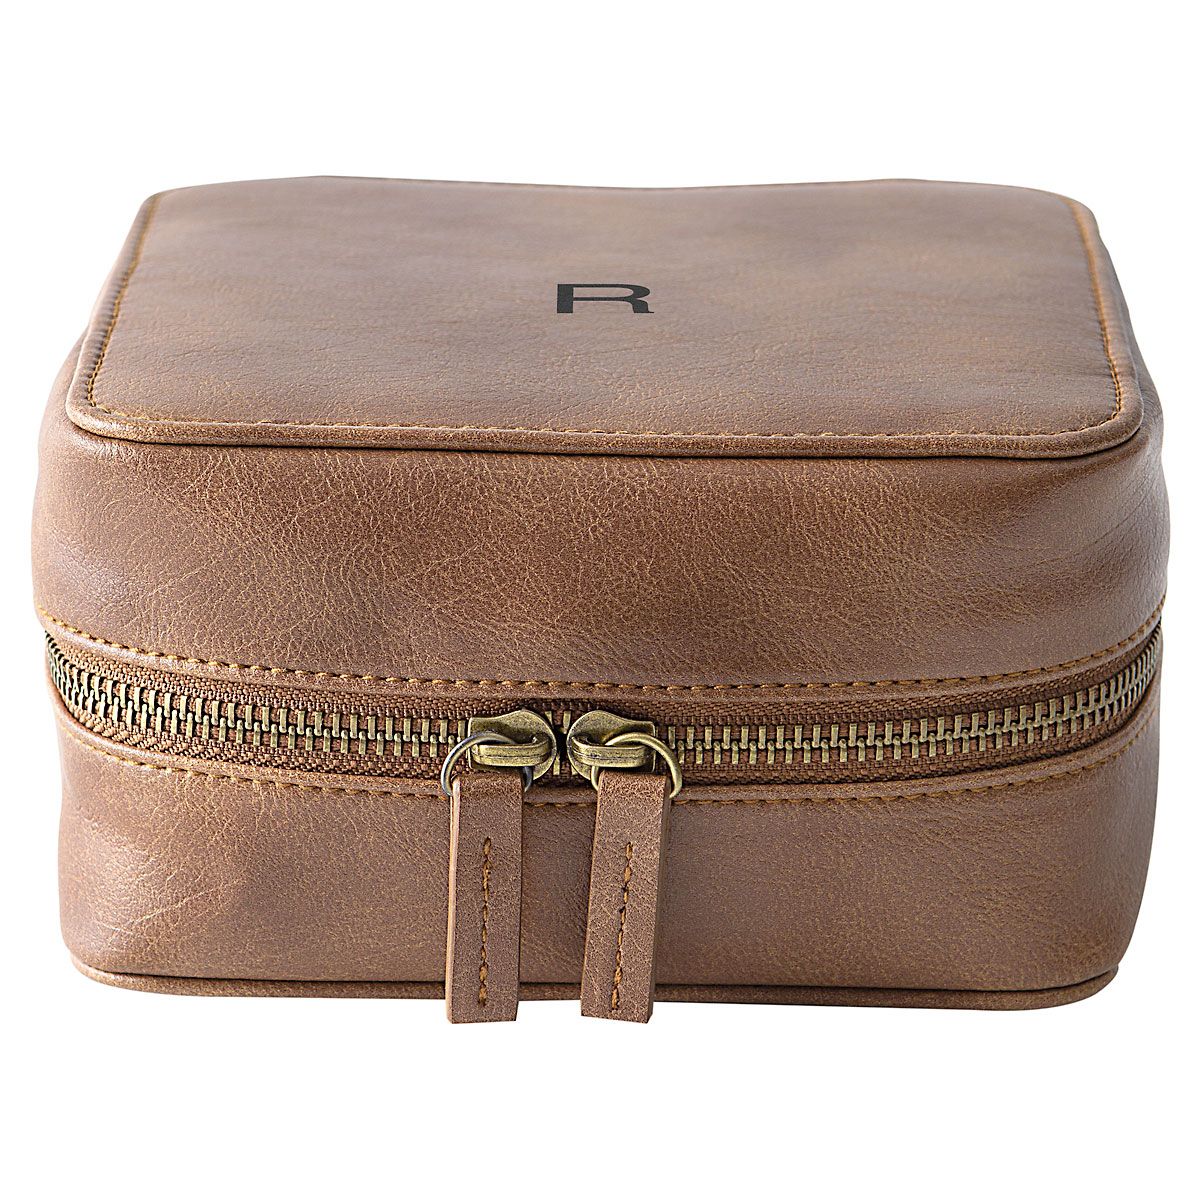 Personalized Faux Leather Tech Travel Case, Suede Brown